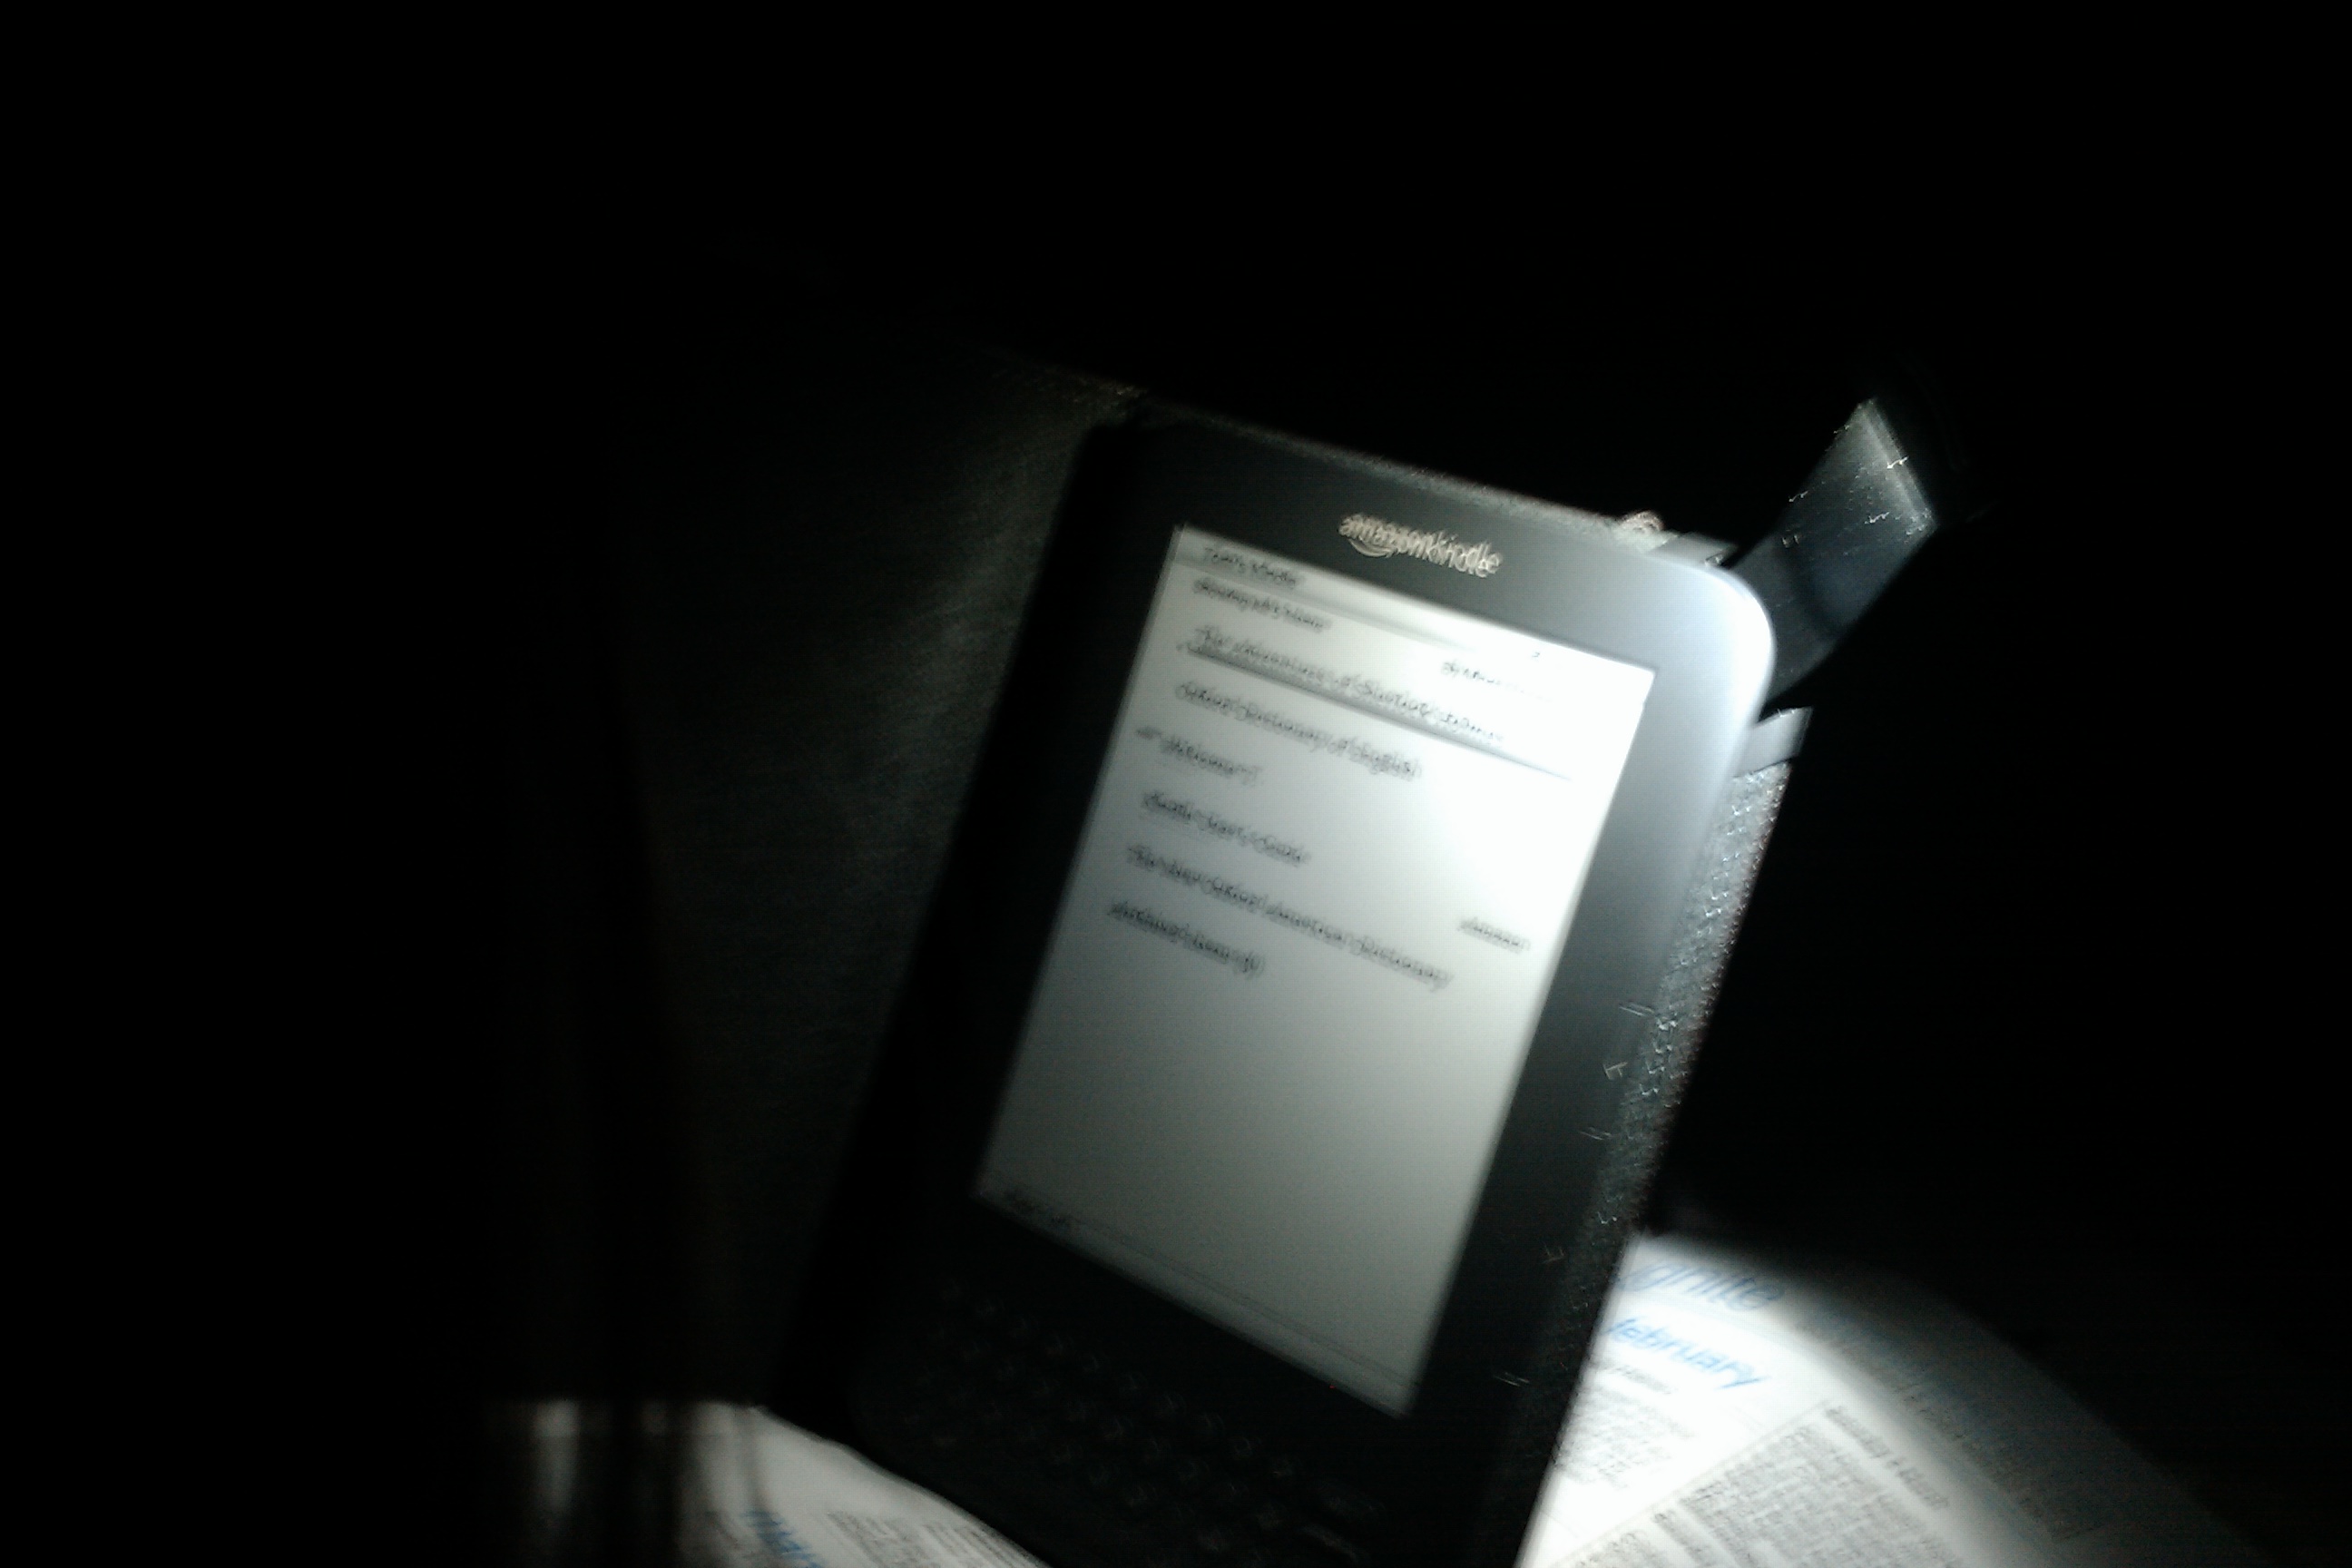 Amazon Kindle light cover in the dark